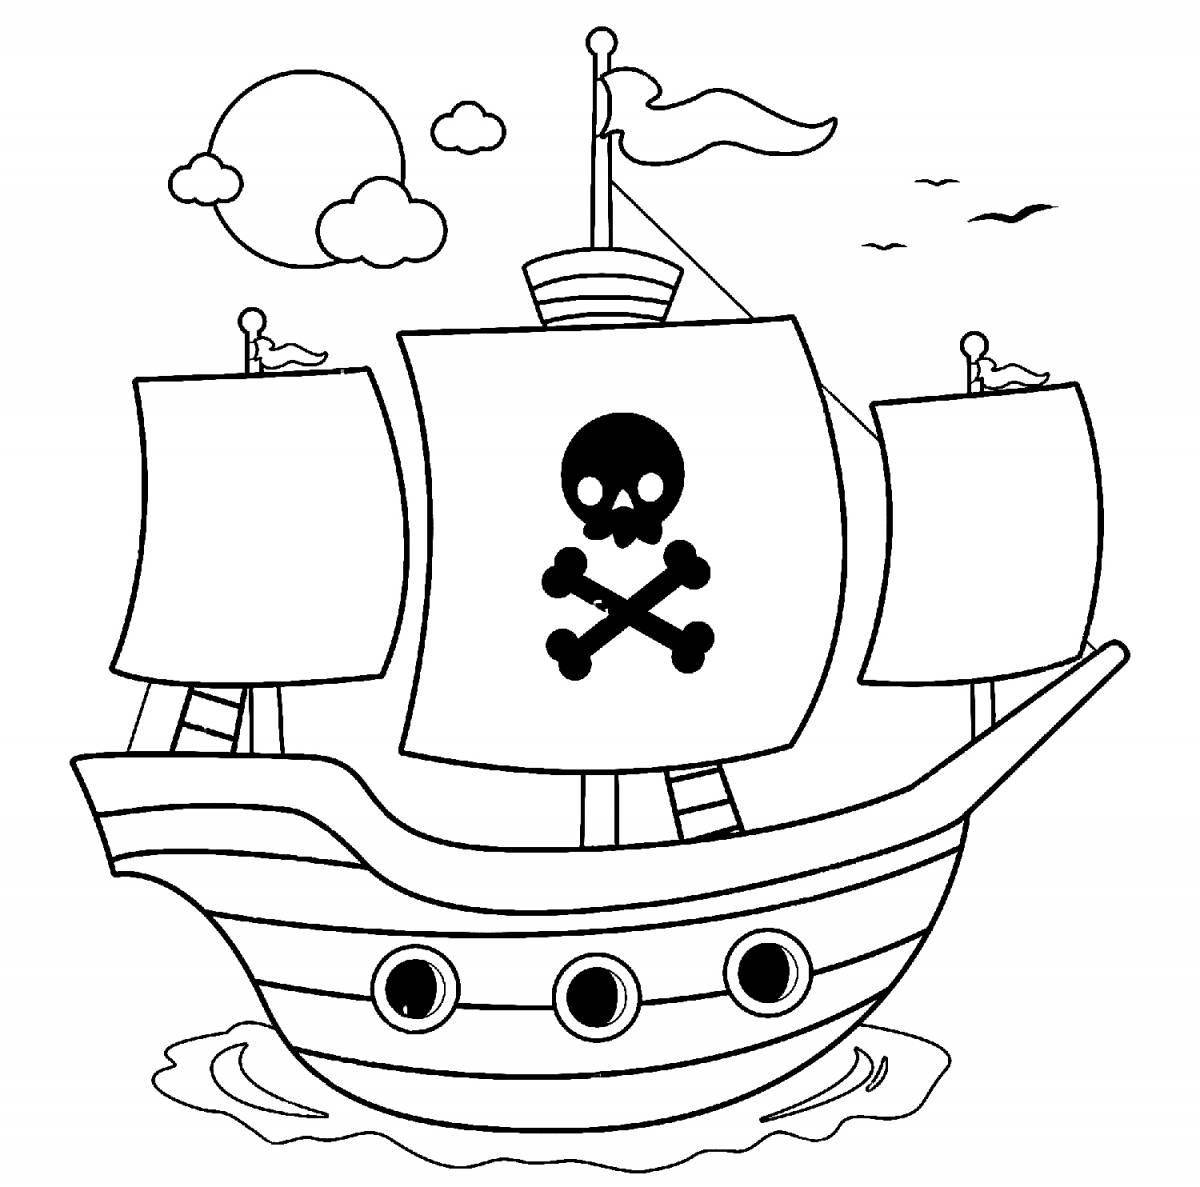 Incredible pirate ship coloring book for kids